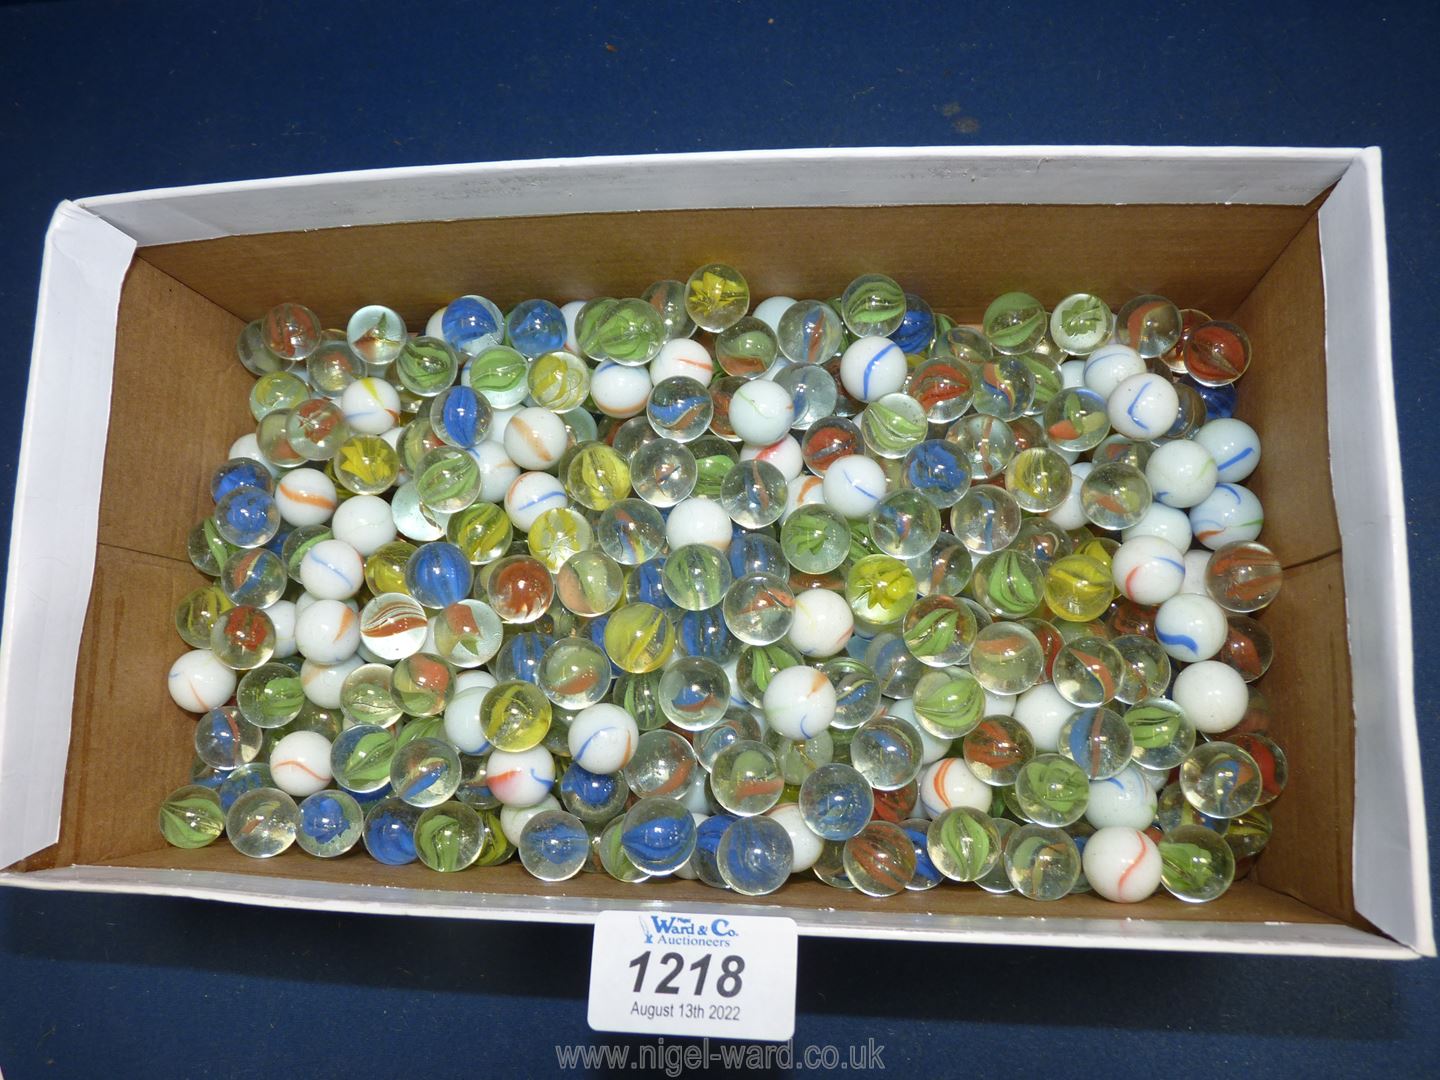 A large quantity of marbles.